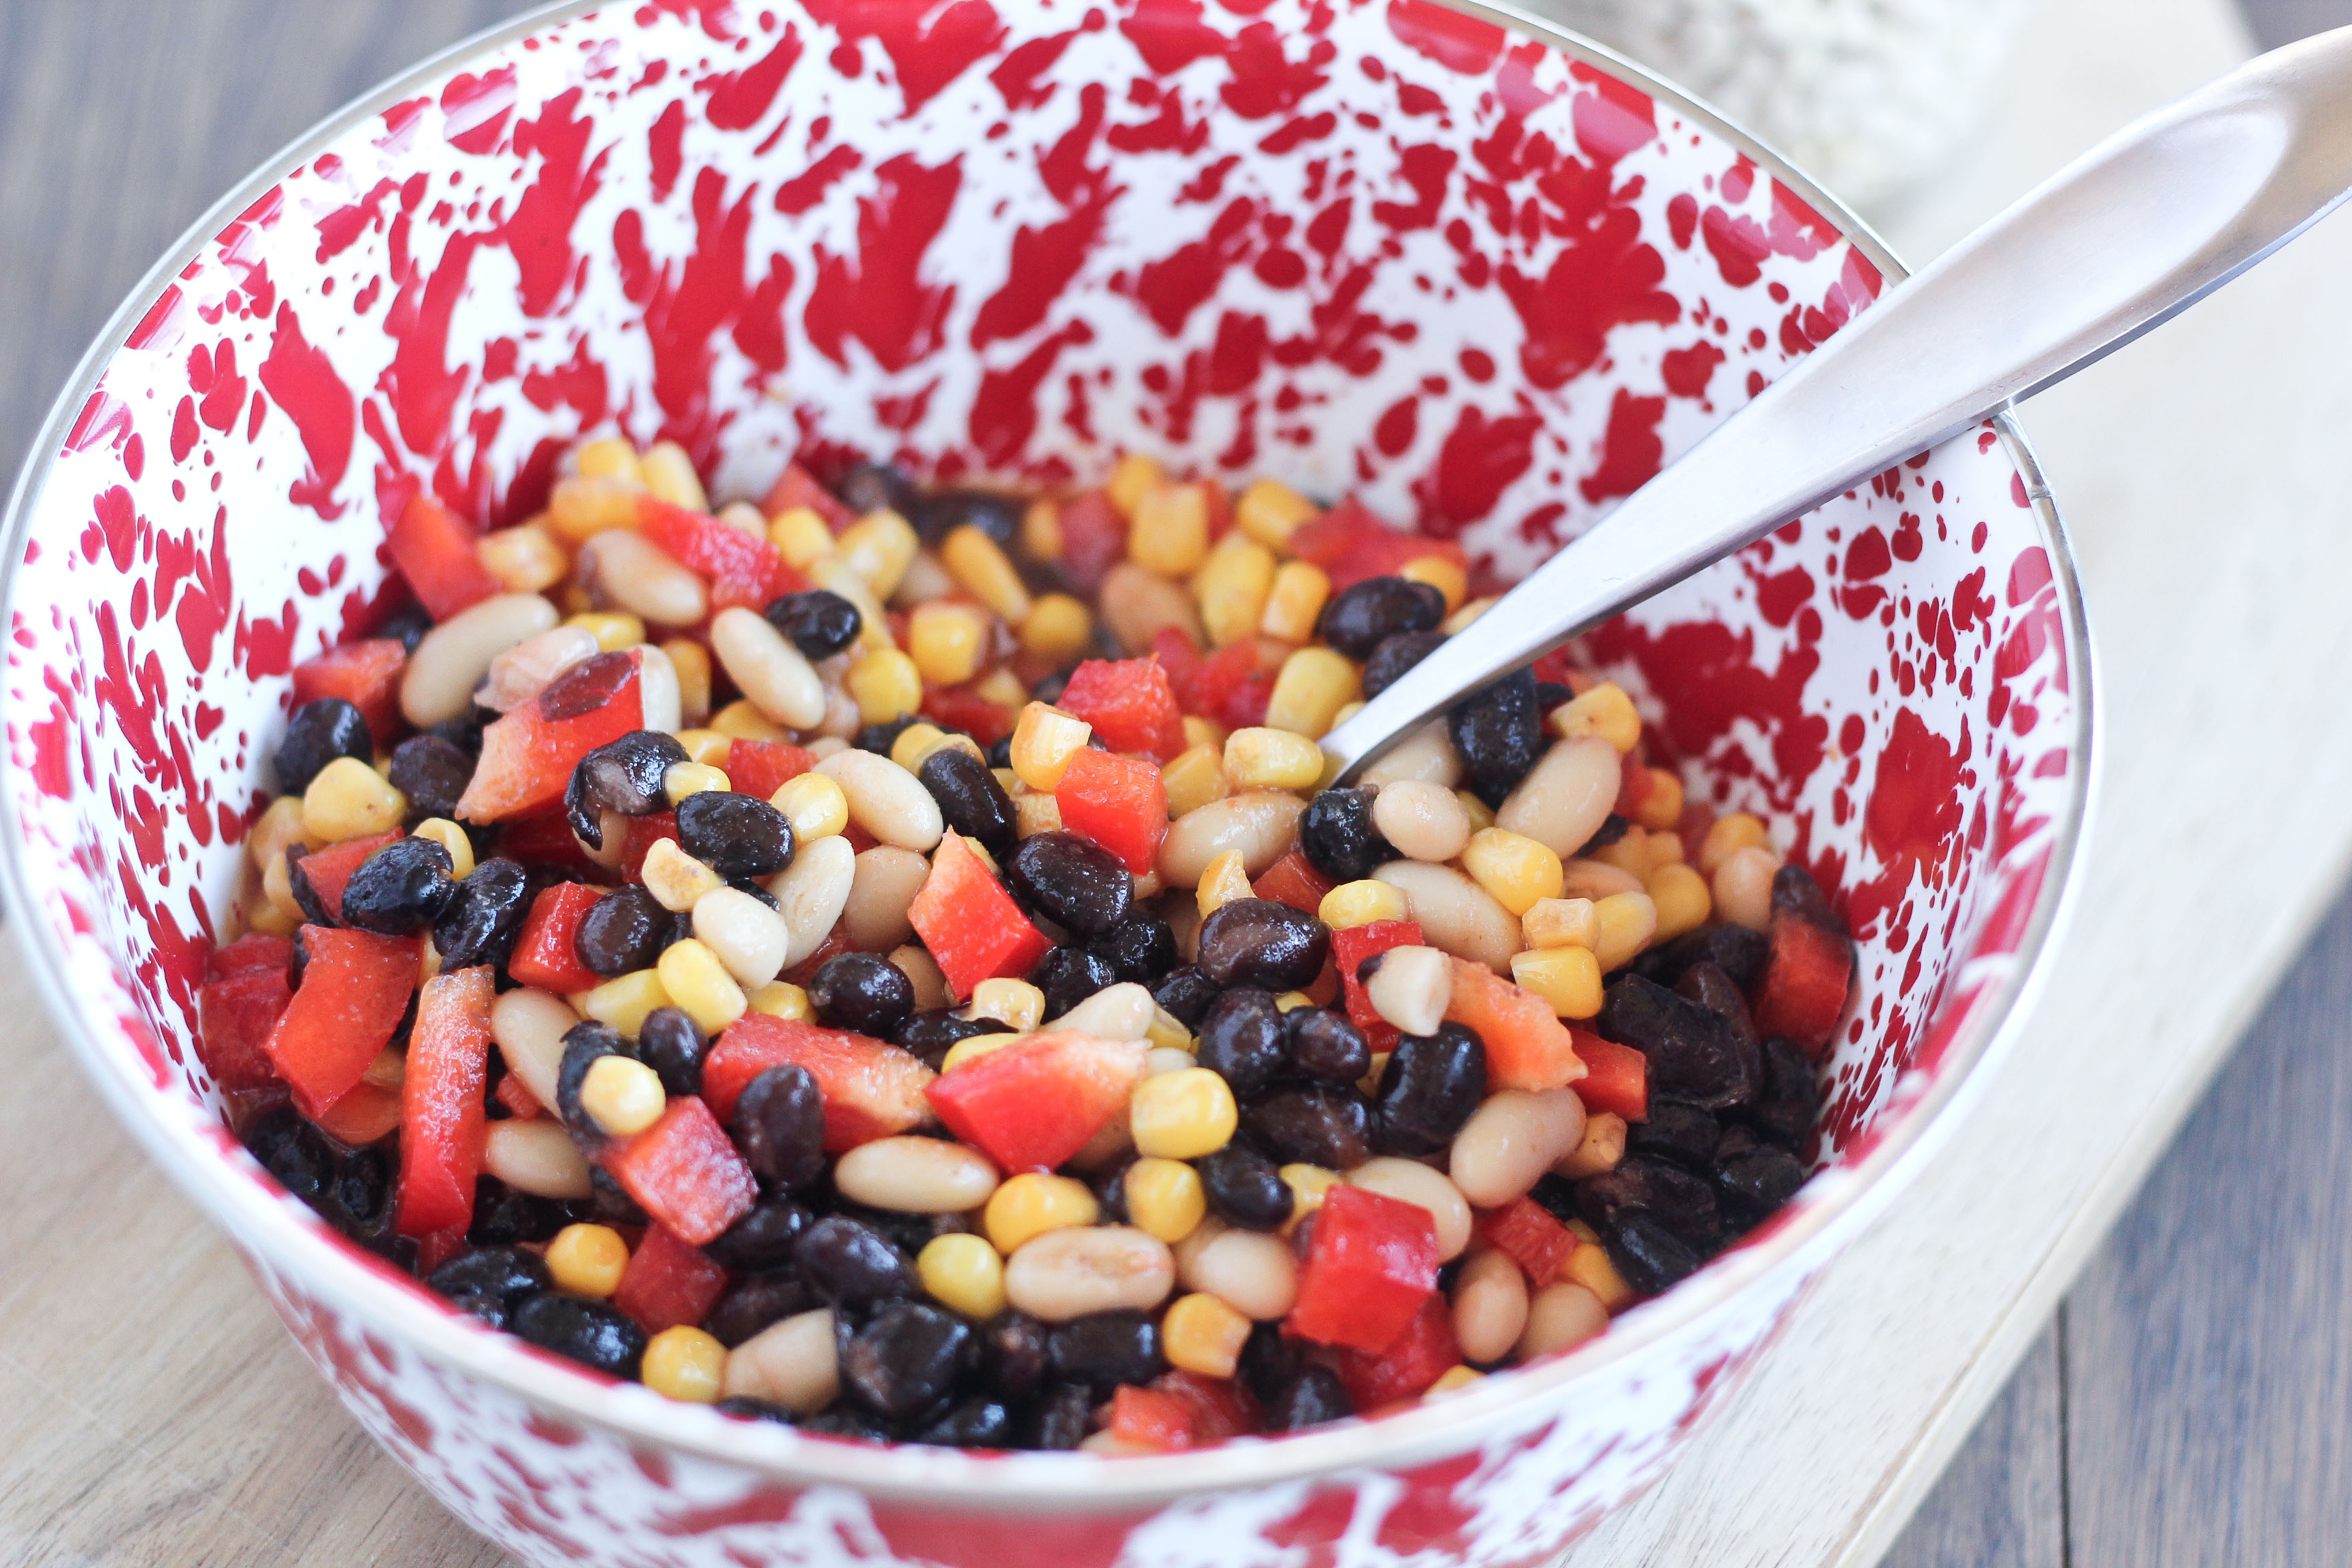 An image depicting the delicious black and white bean salad recipe.